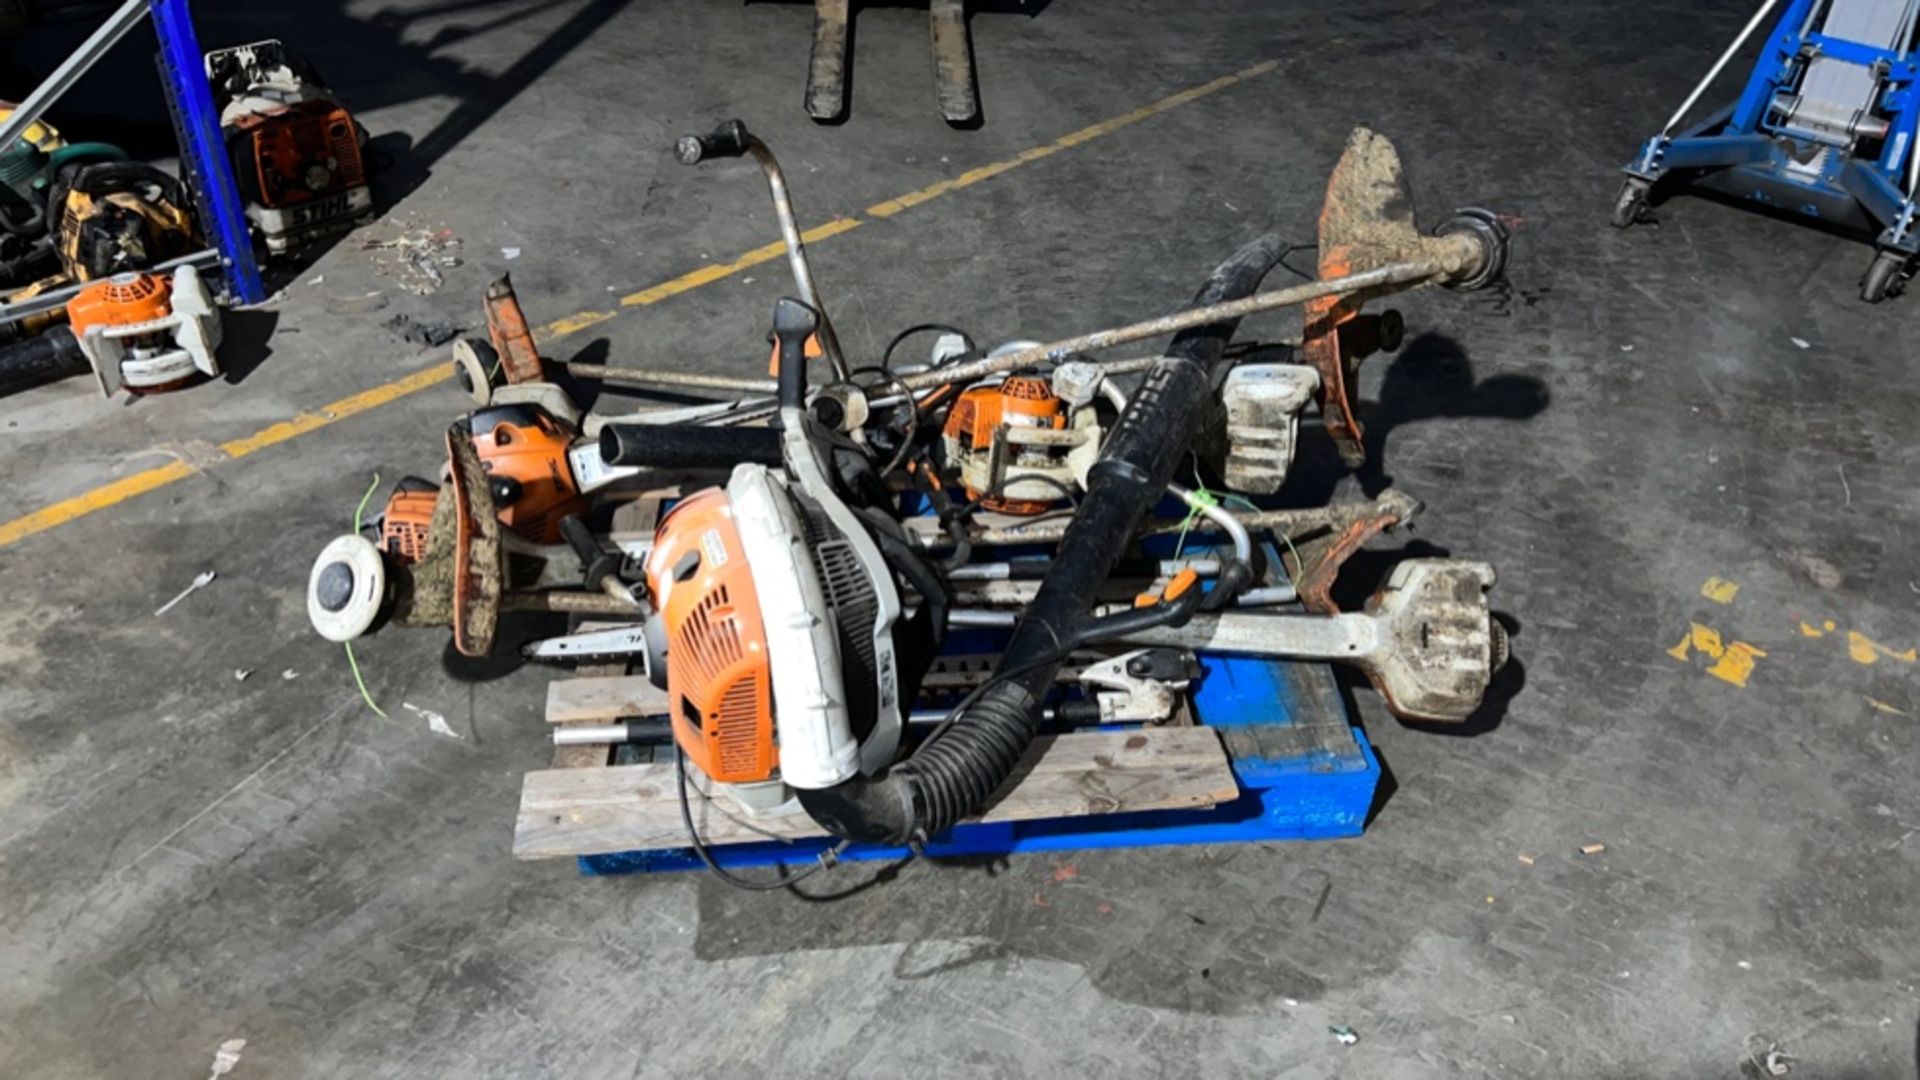 ASSORTED STIHL ITEMS INCLUDING, 5 STRIMMERS, 1 LEAFBLOWER, 1 LEAFBLOWER C/W BACK PACK - Image 3 of 4